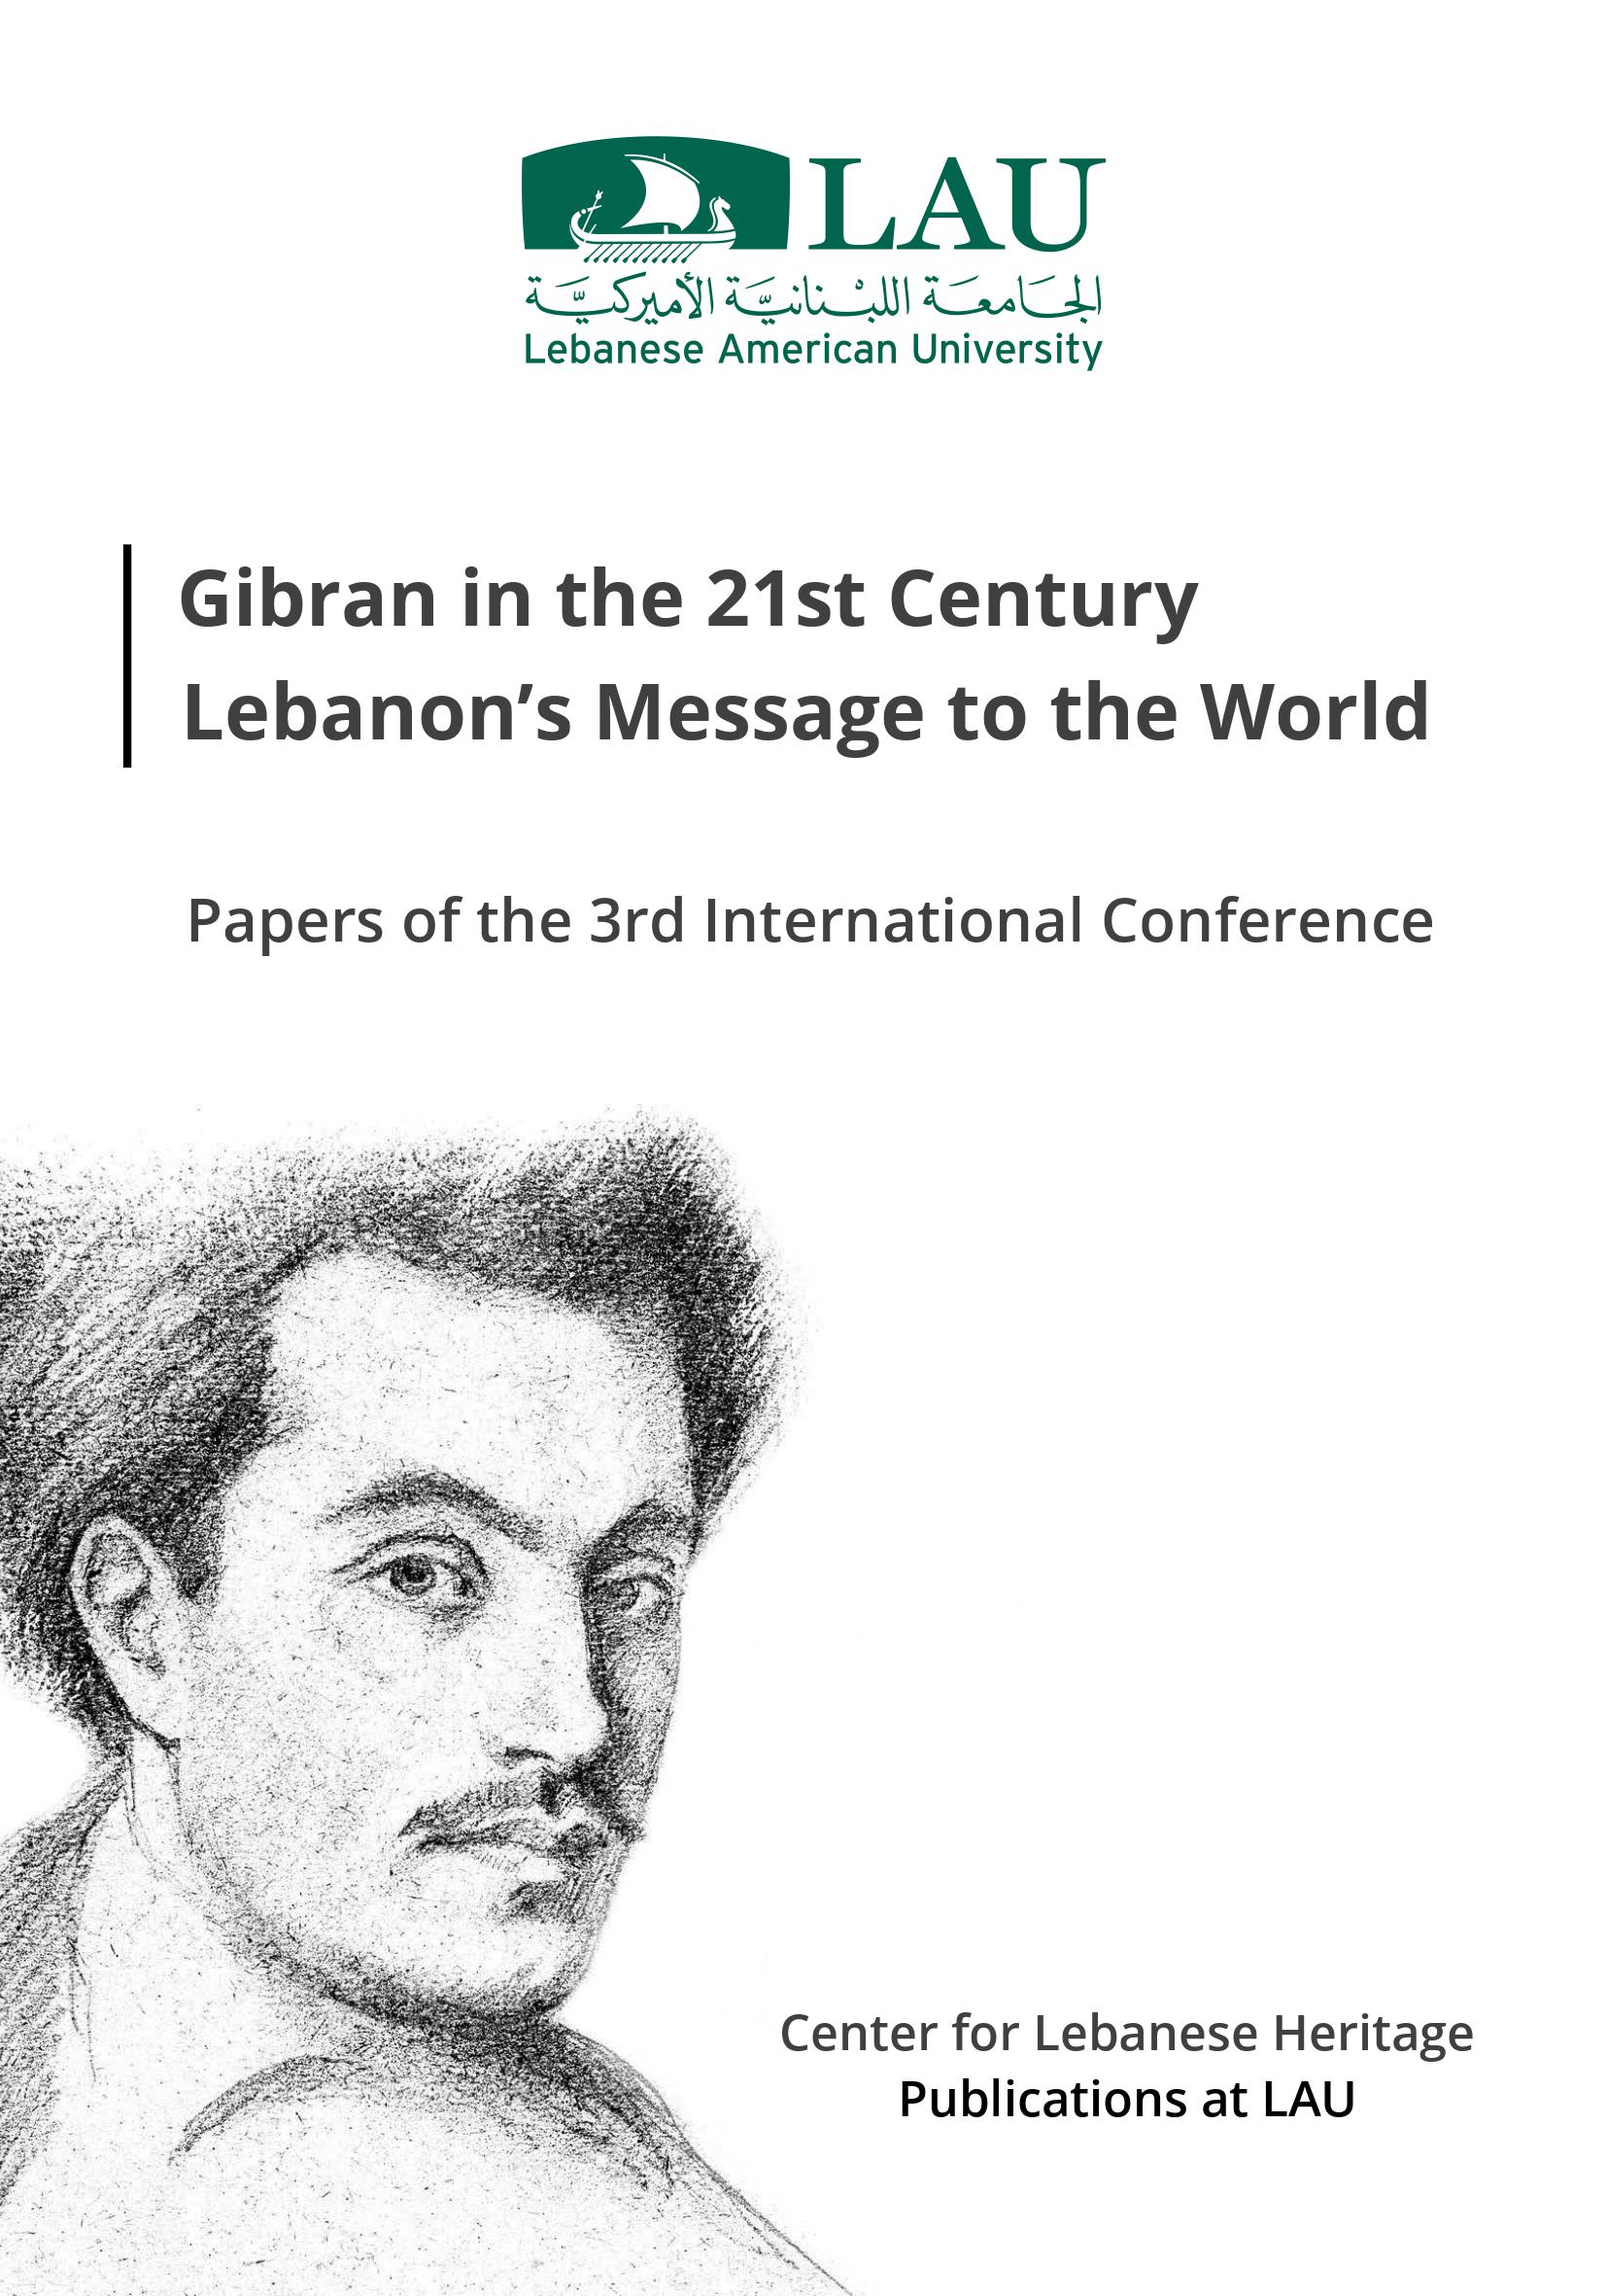 Gibran in the 21th Century: Lebanon's Message to the World [3rd Gibran International Conference Proceedings], edited by H. Zoghaib and M. Rihani, Beirut: Center for Lebanese Heritage, LAU, 2018.